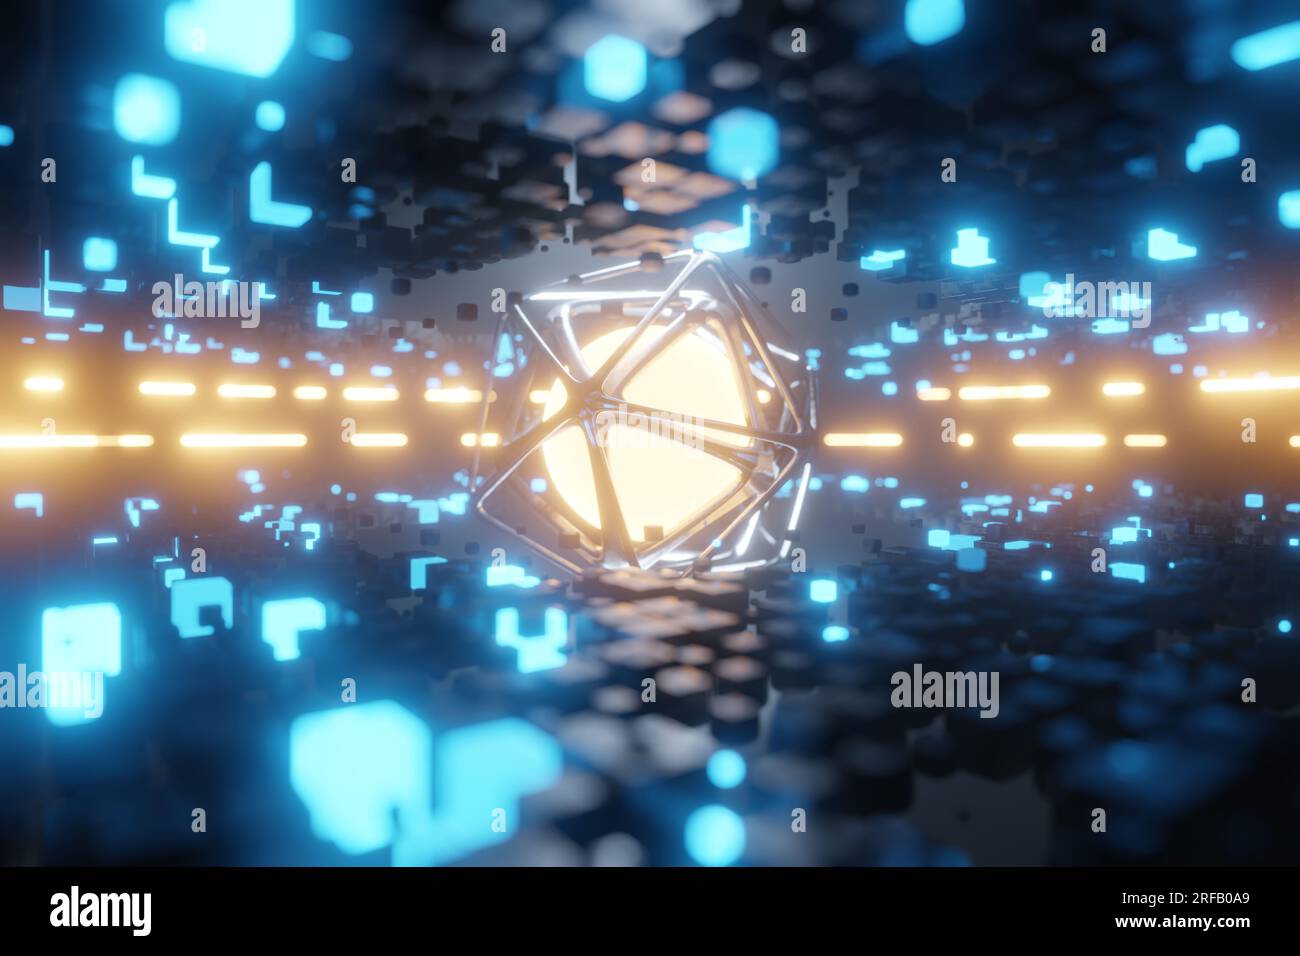 Abstract background, soft focus. A fantastic sphere of metal hexagons in the center. Abstract illustration. The idea of energy, the core of cosmic for Stock Photo